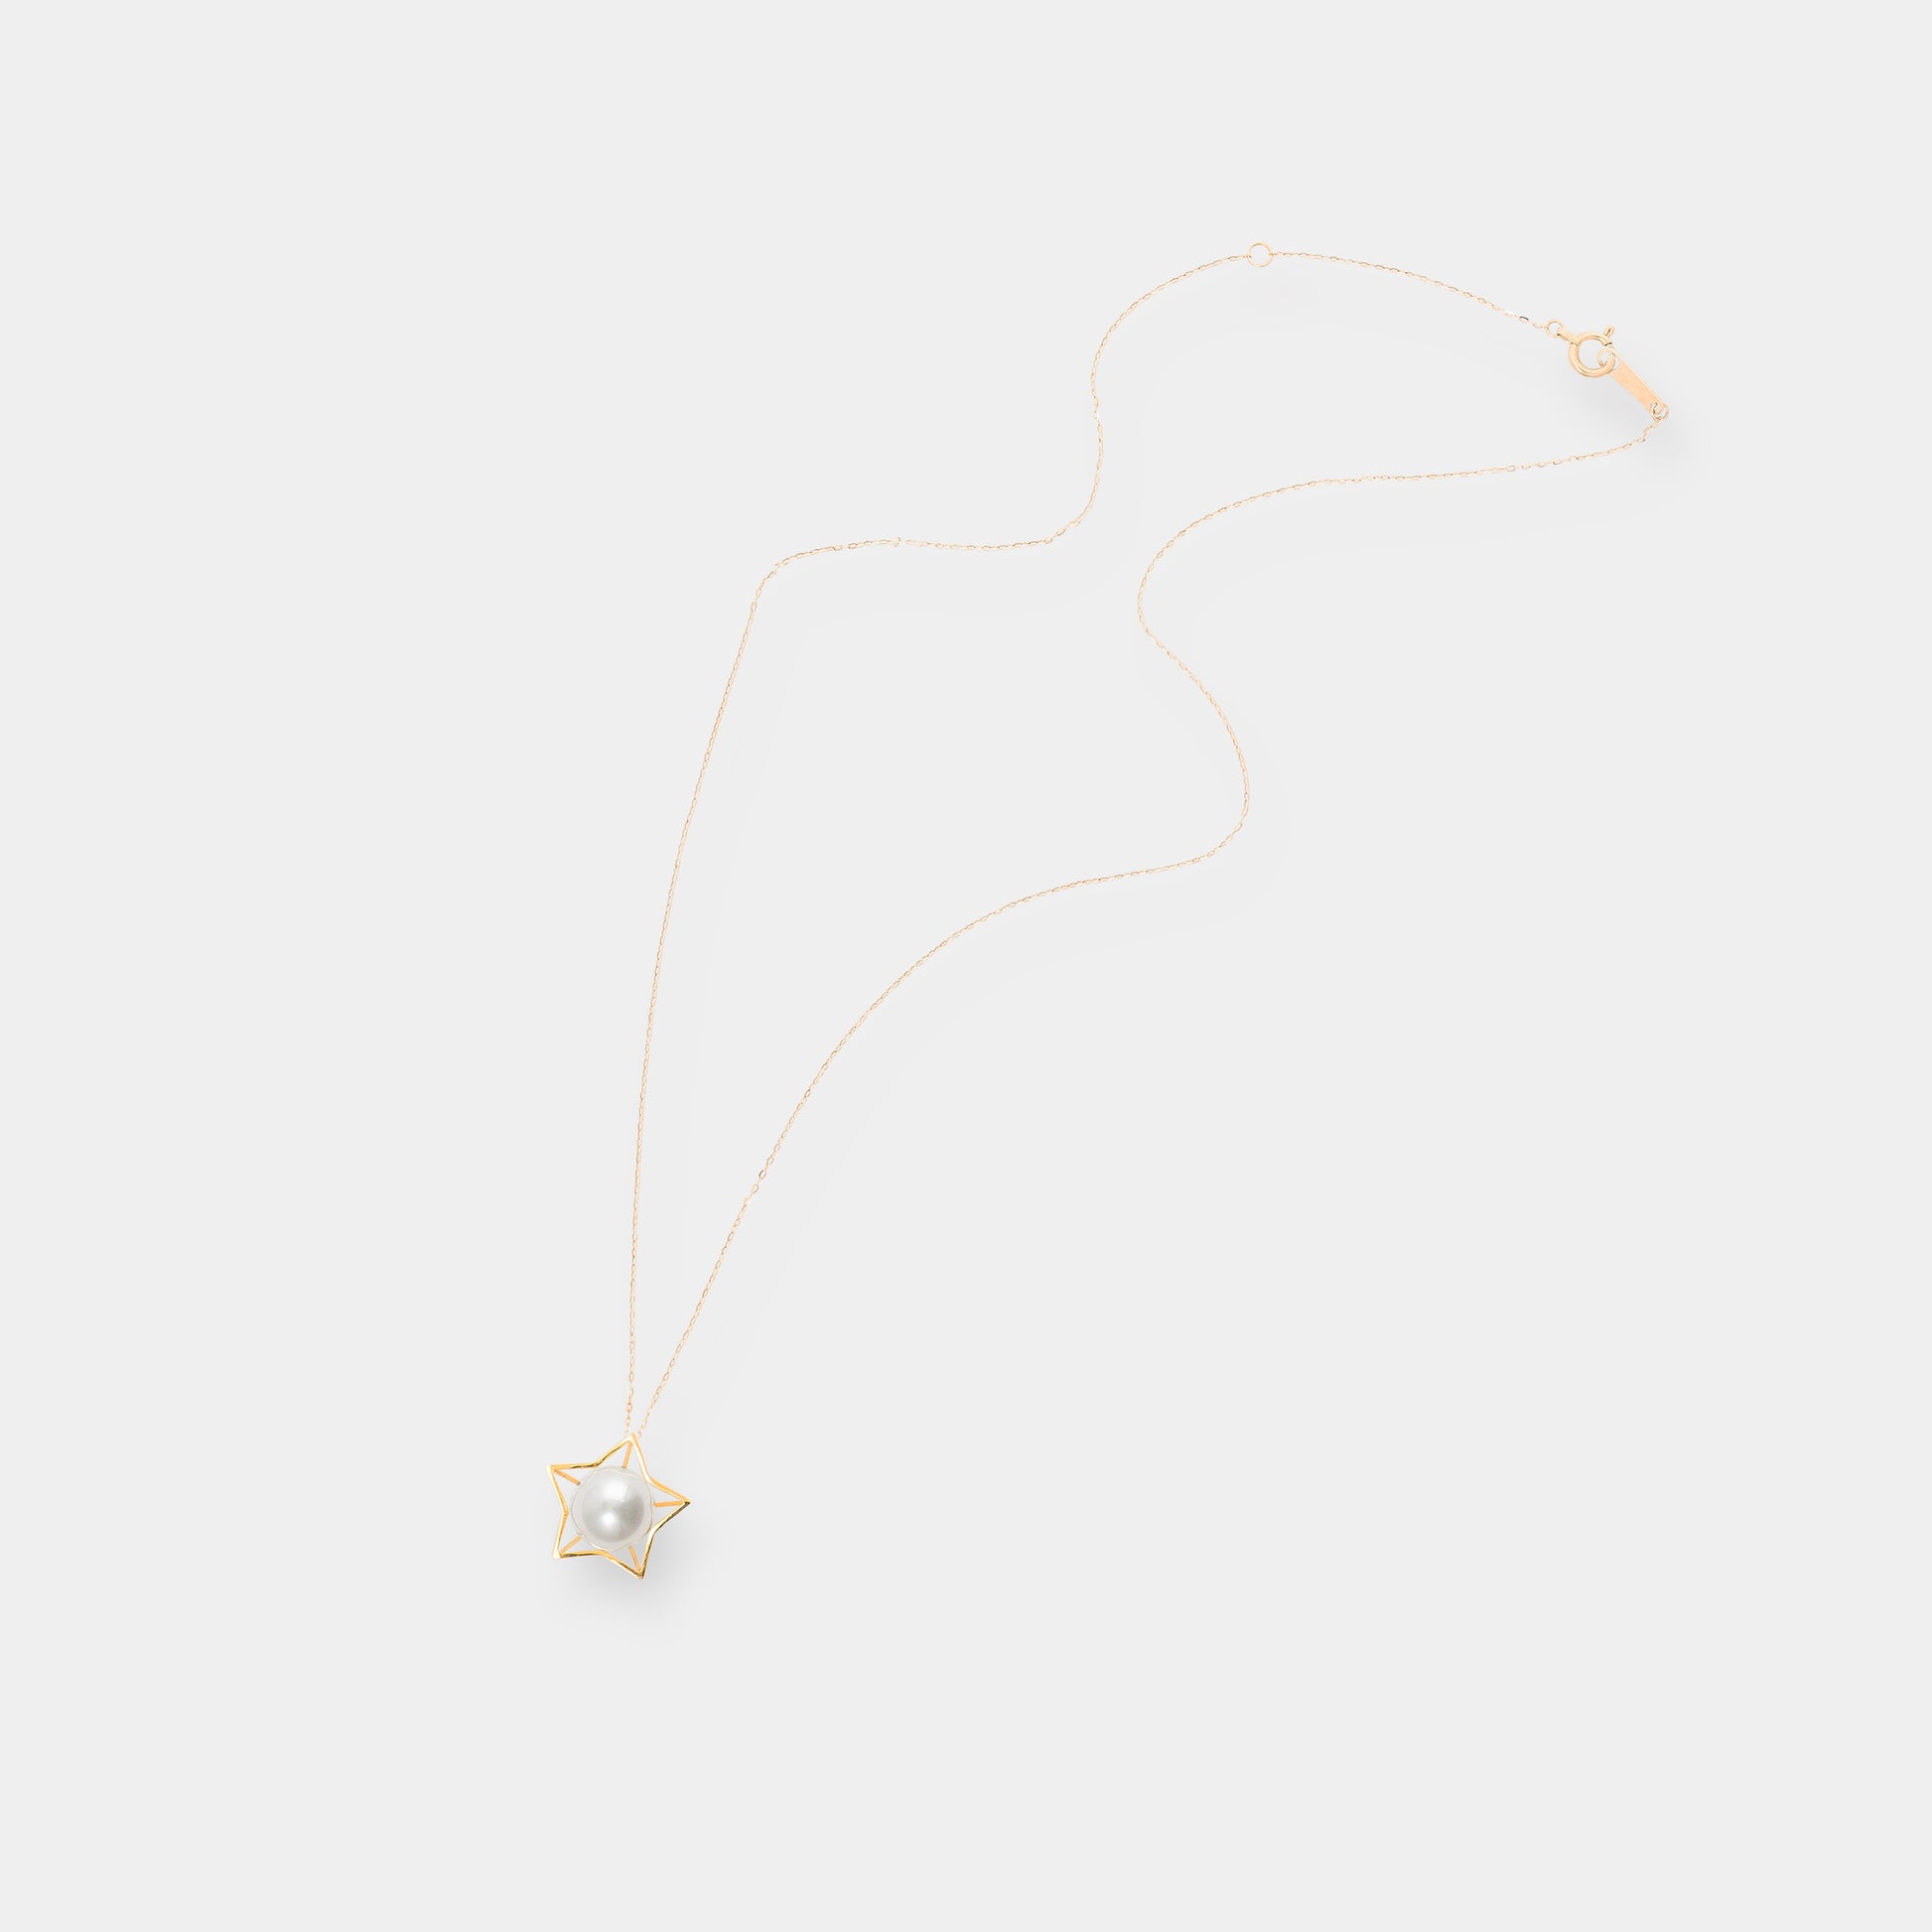 Indulge in timeless beauty with a star gold pearl necklace, a symbol of elegance and refinement. Elevate your style with this exquisite accessory.